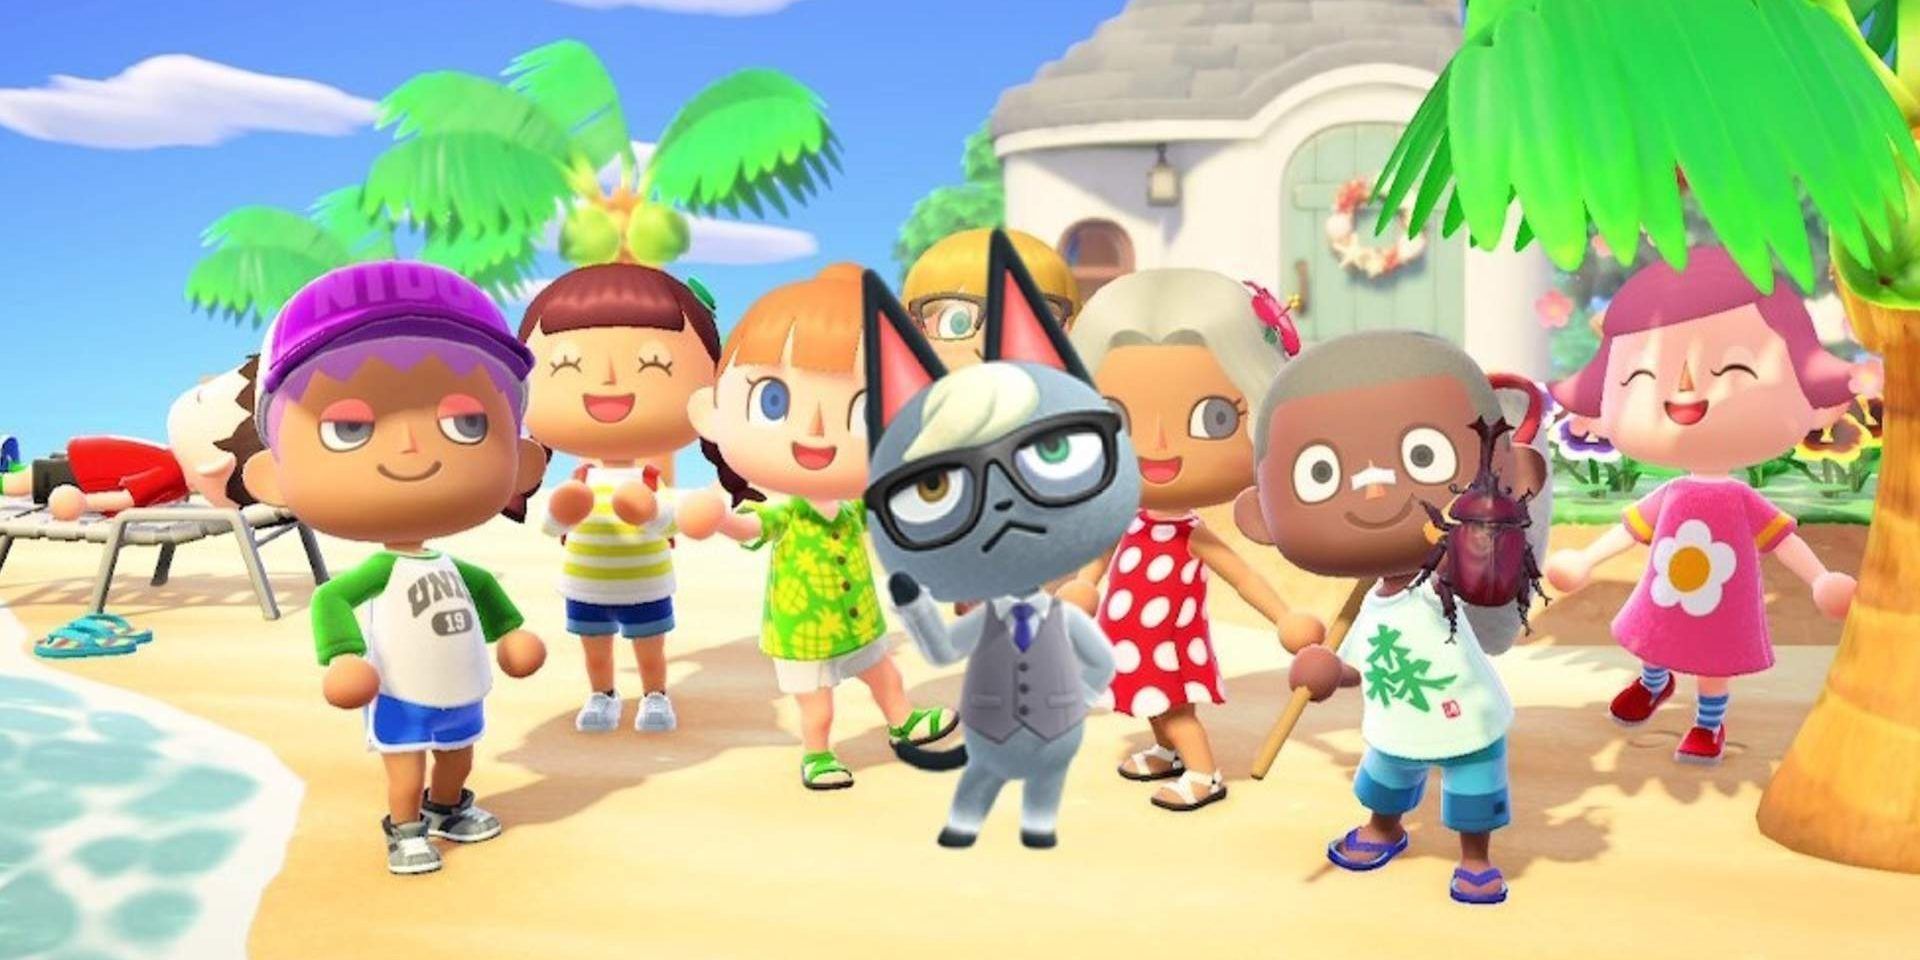 Raymond stands in front of a group of villagers on the beach